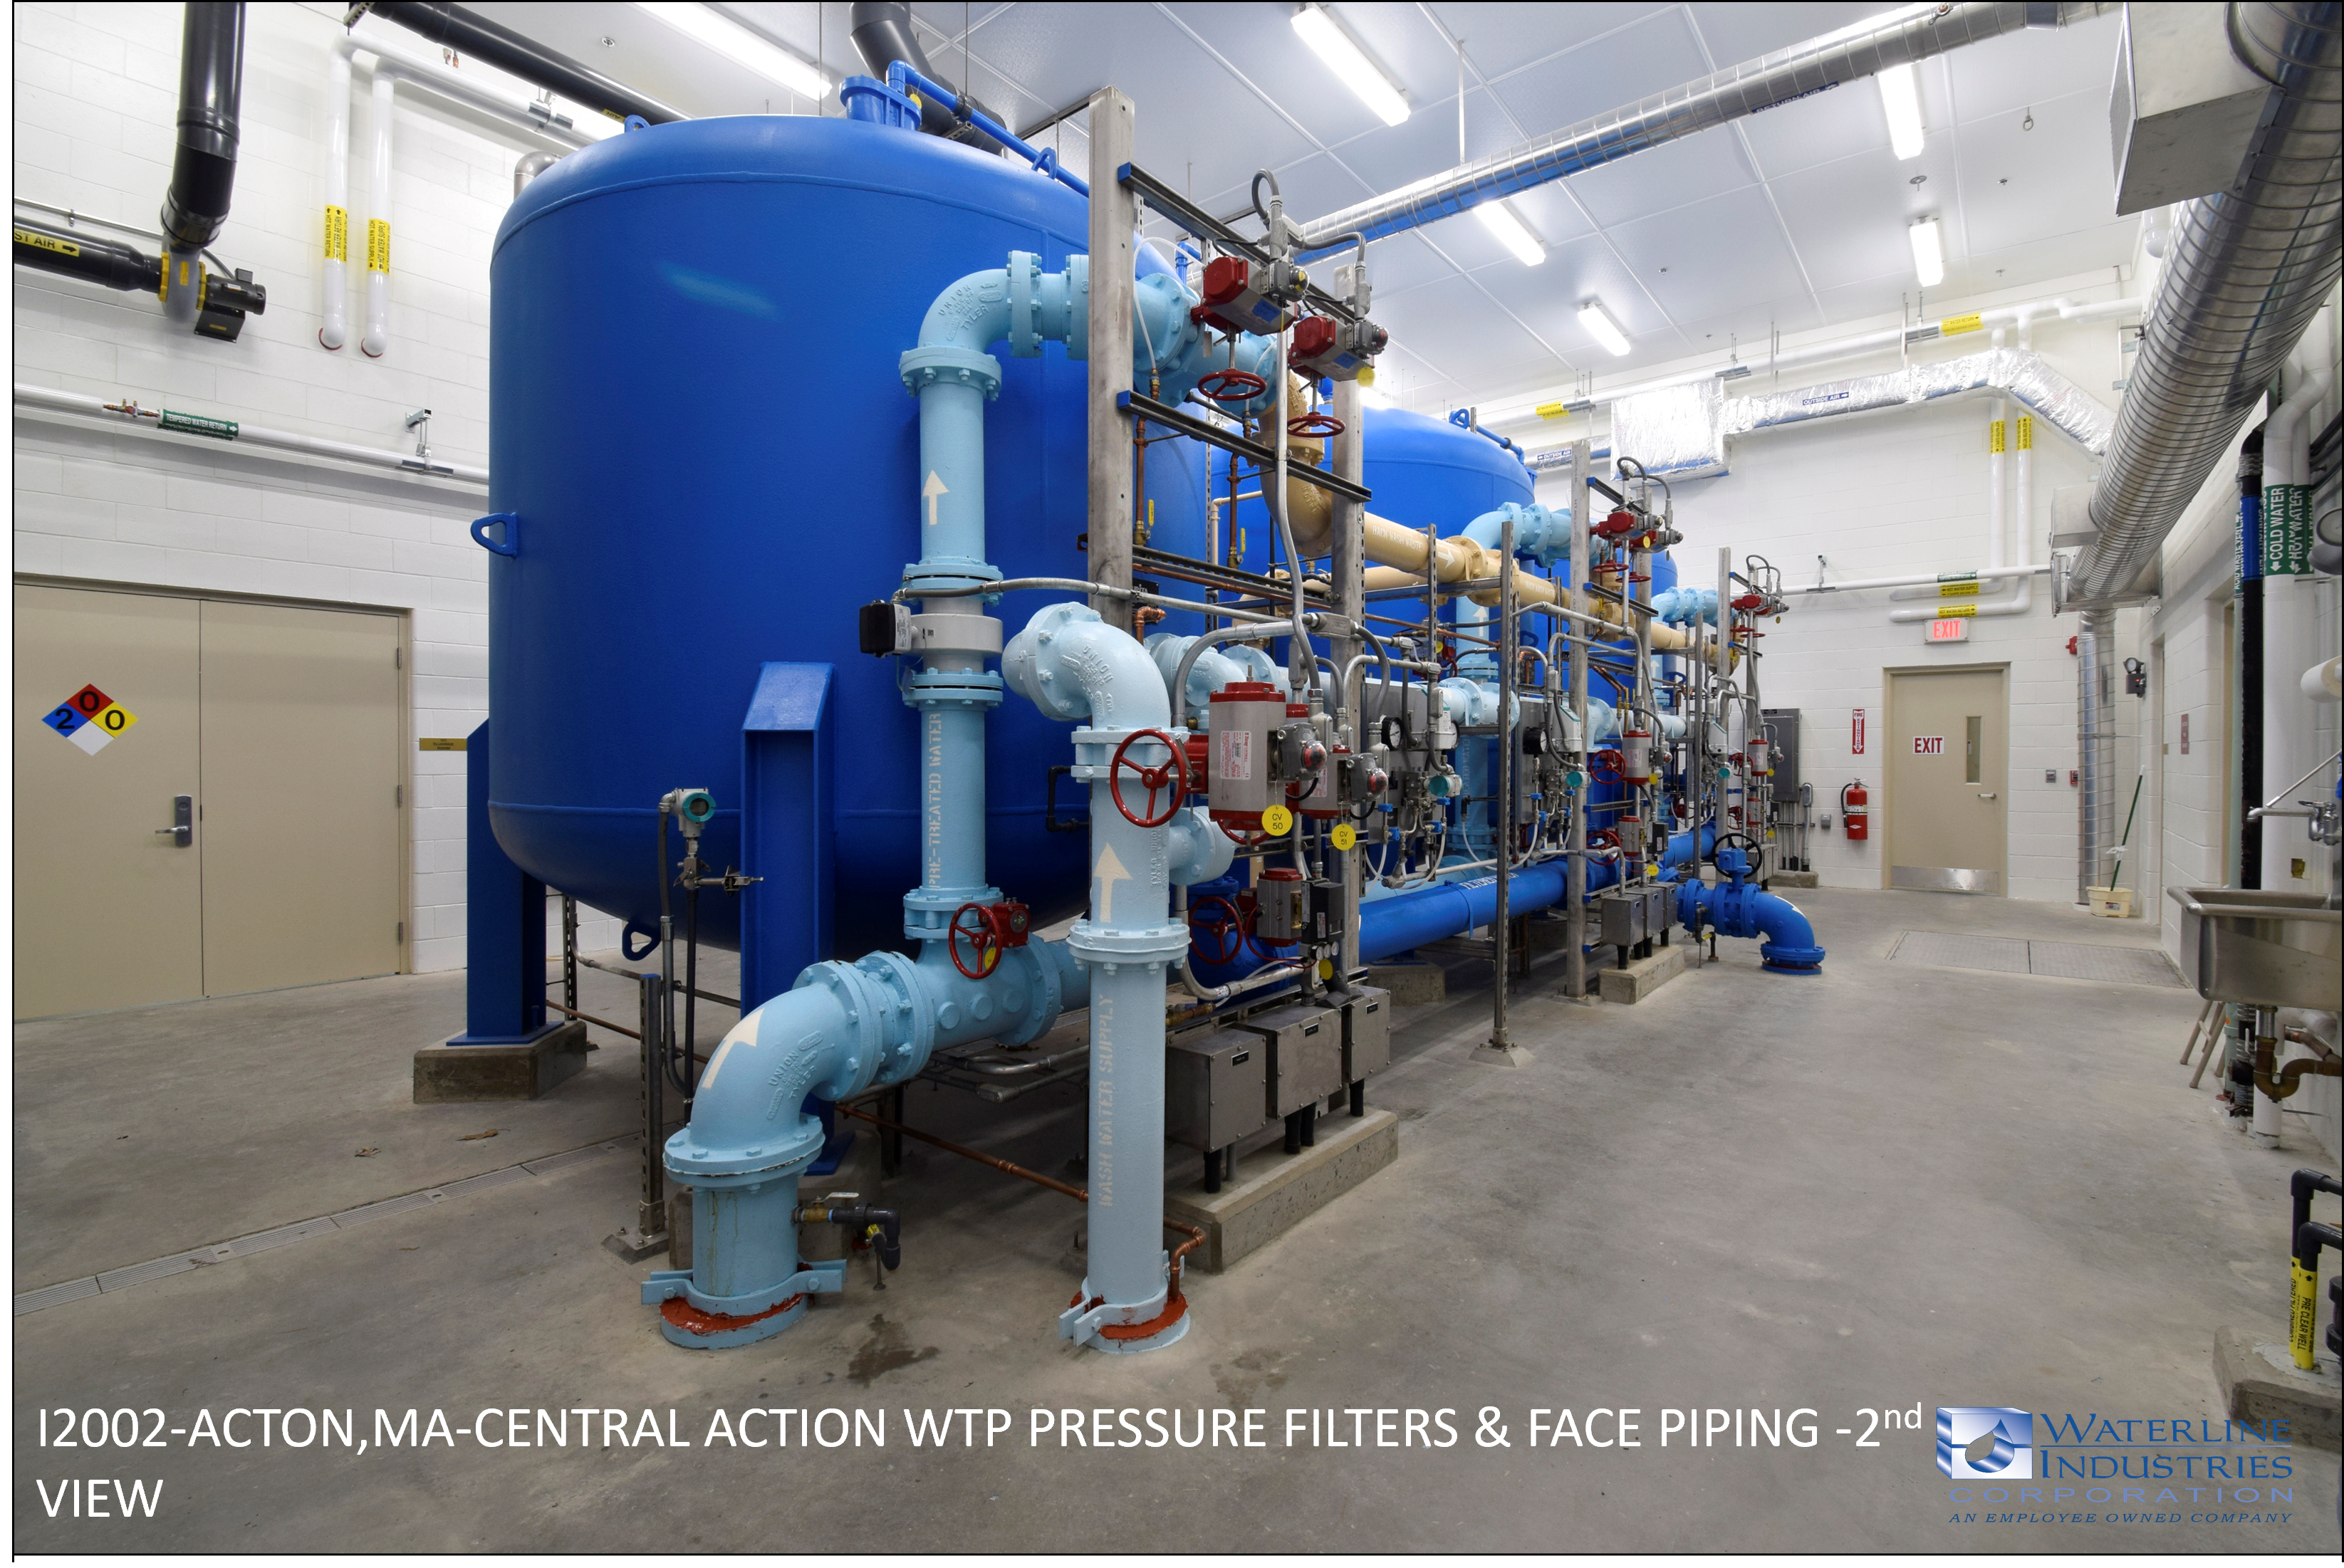 I2002-ACTON,MA-CENTRAL ACTION WTP PRESSURE FILTERS & FACE PIPING 2ND VIEW